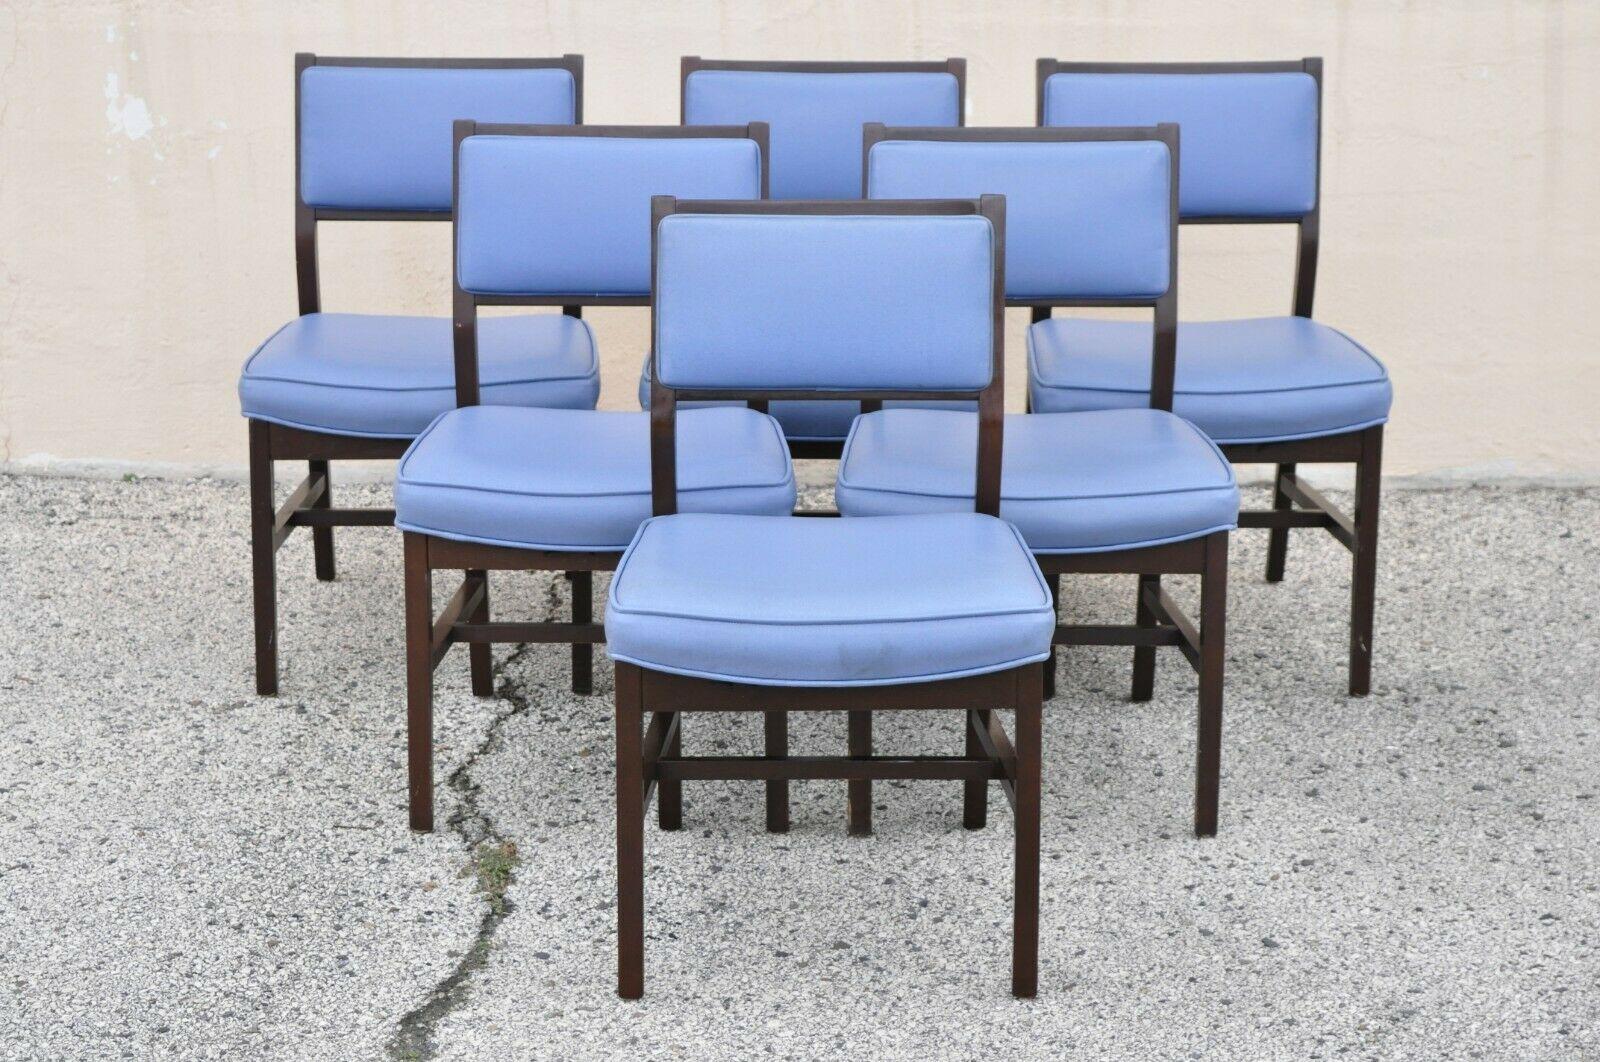 Vintage Mid Century Modern Jens Risom Style Blue Sculpted Dining Chair -Set of 6 For Sale 3